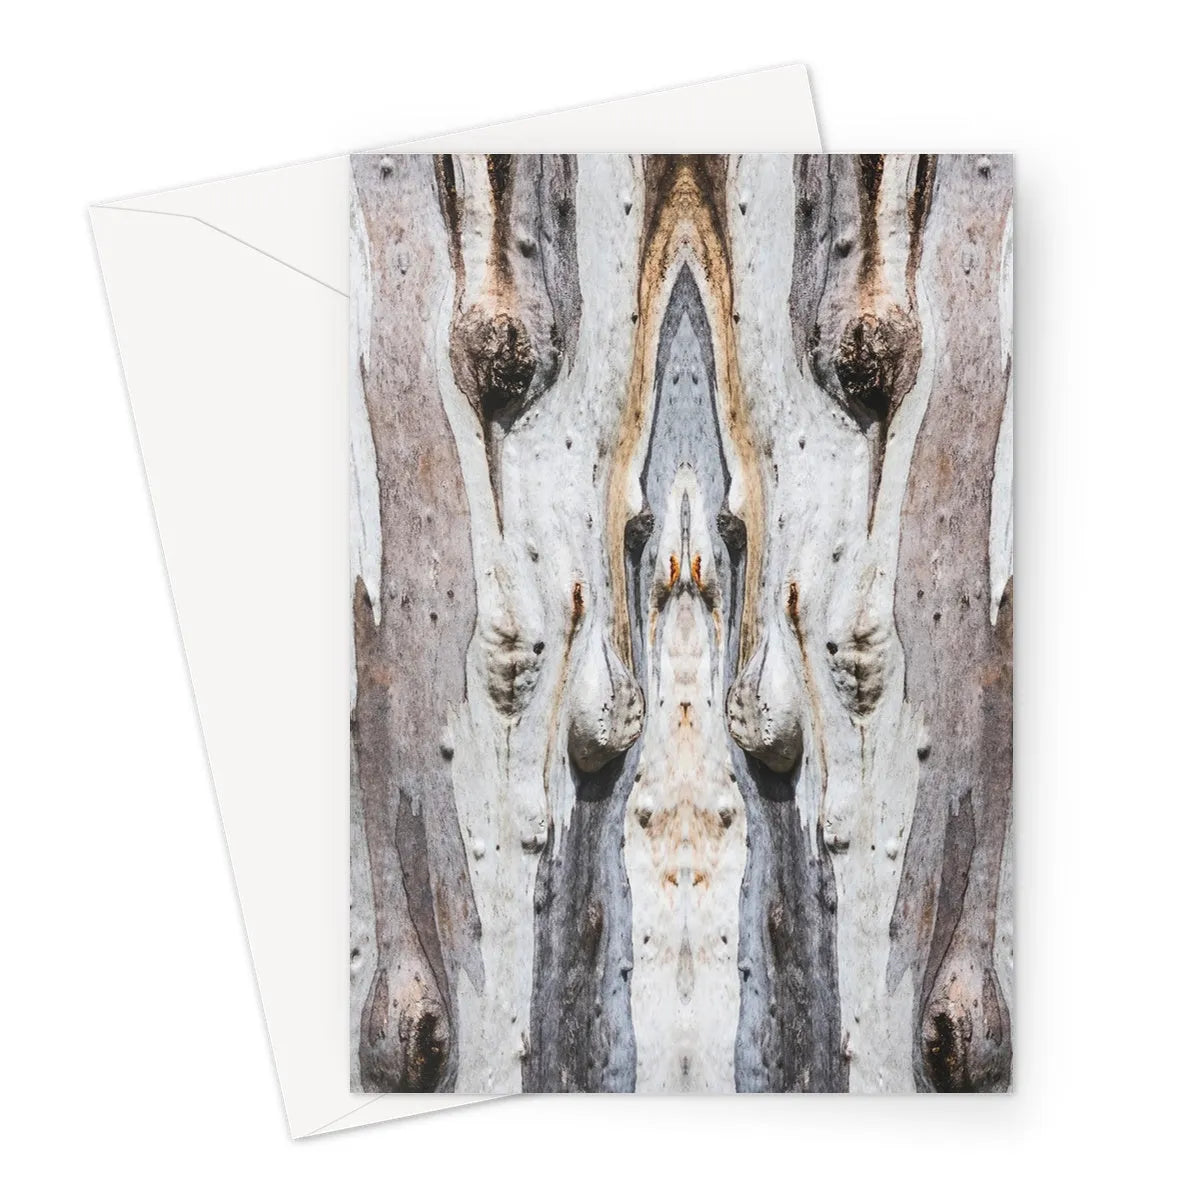 Barking Mad 3 Greeting Card - A5 Portrait / 1 Card - Greeting & Note Cards - Aesthetic Art